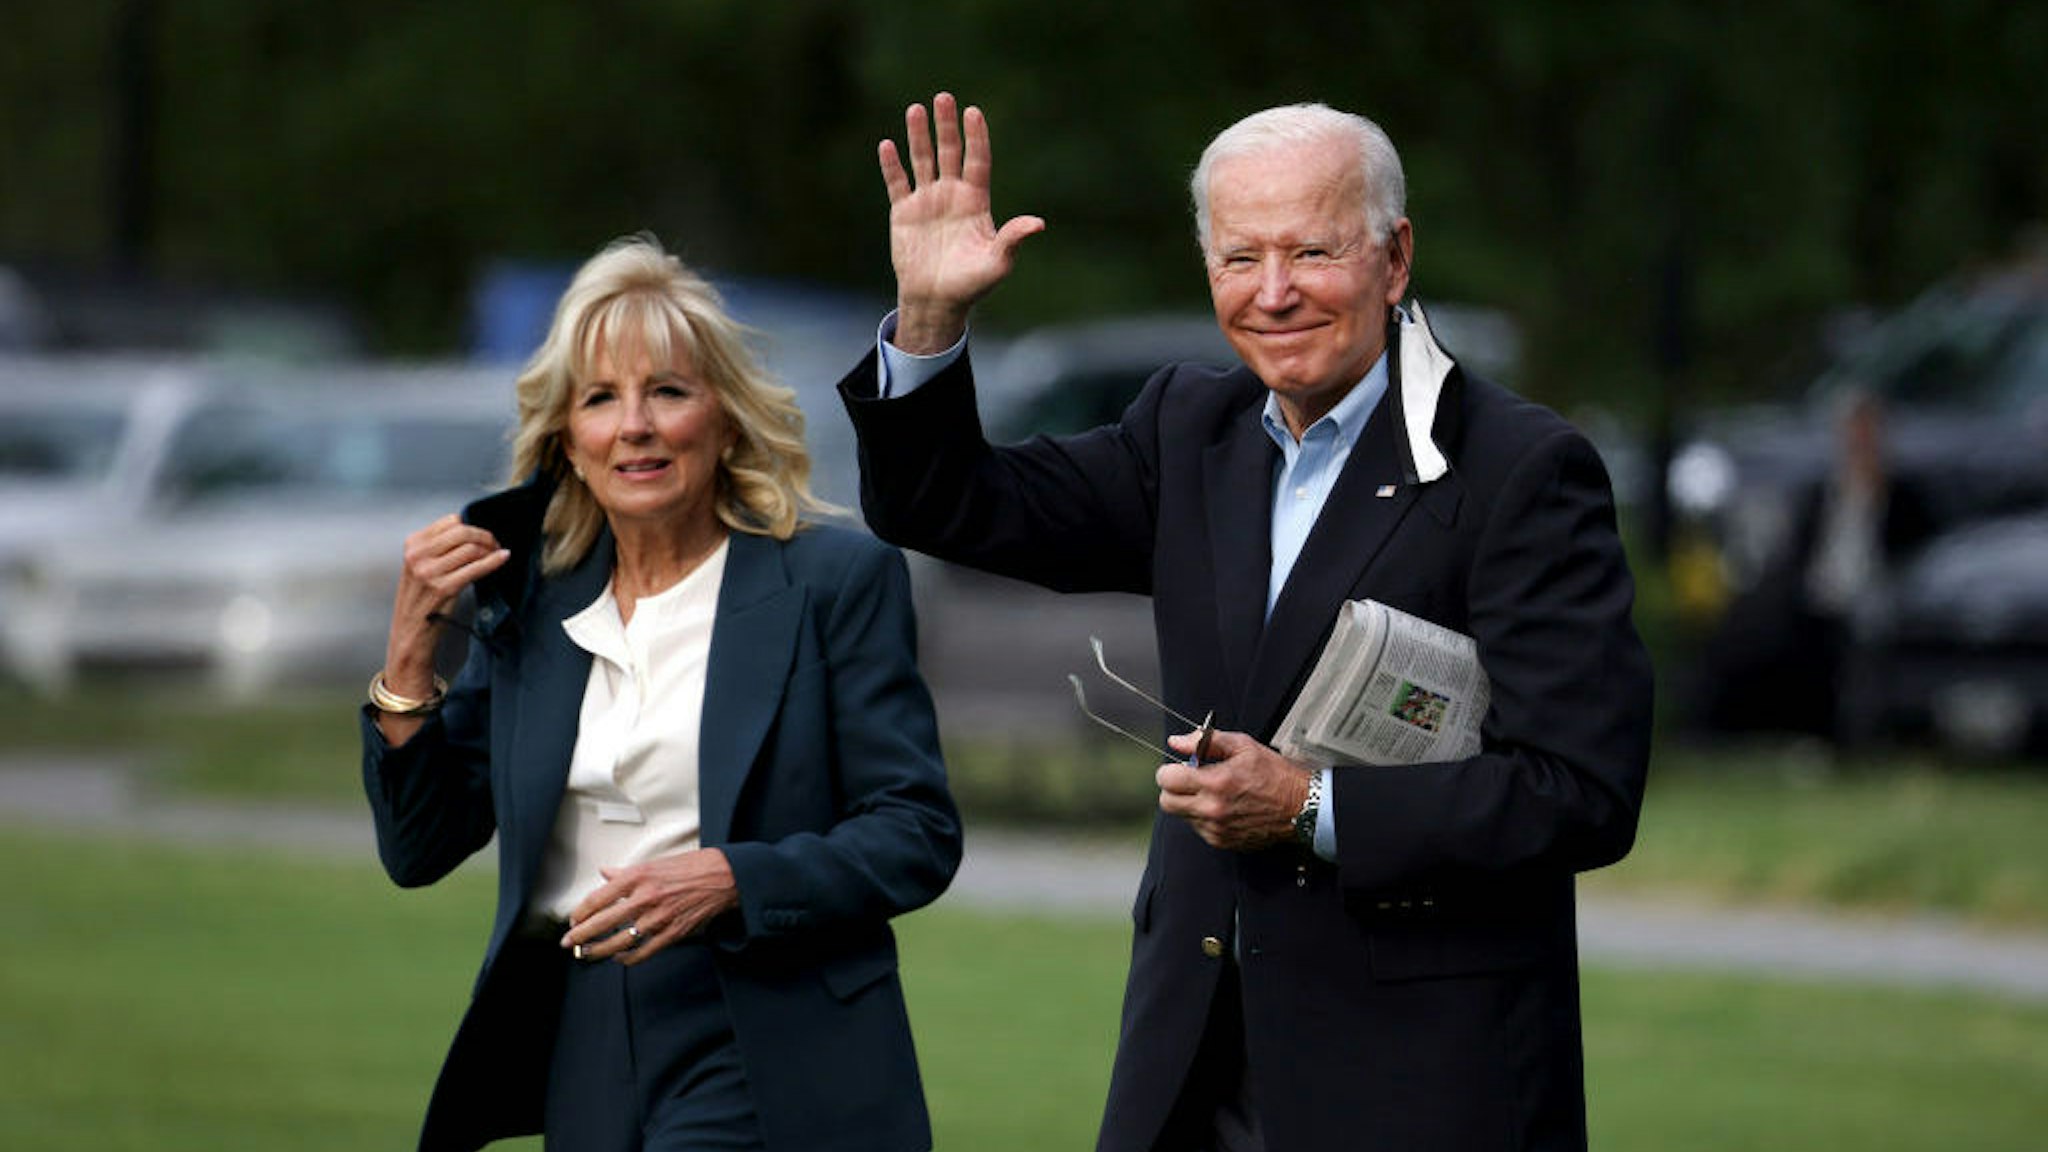 WASHINGTON, DC - JUNE 09: U.S. President Joe Biden waves as he and First Lady Jill Biden walk on the ellipse to board Marine One on June 09, 2021 in Washington, DC. President Joe Biden and the First Lady are traveling to the United Kingdom for the G7 Summit and will later travel to Belgium and Switzerland, as part of an eight day trip through Europe. (Photo by Anna Moneymaker/Getty Images)